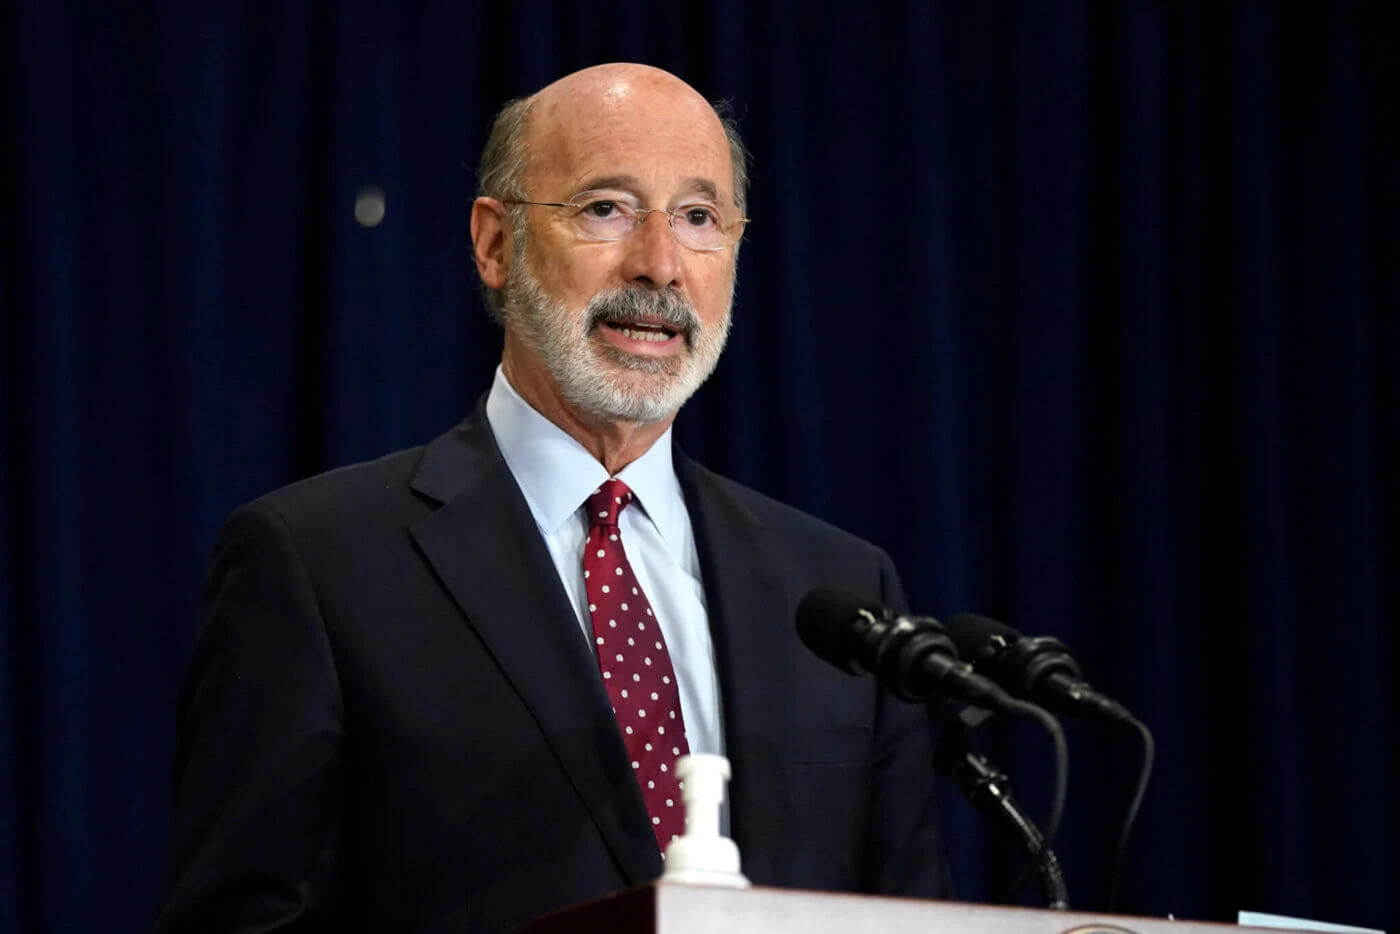 FILE - In this file photo, Pennsylvania Gov. Tom Wolf speaks during a news conference in Harrisburg. (AP Photo/Julio Cortez, File)